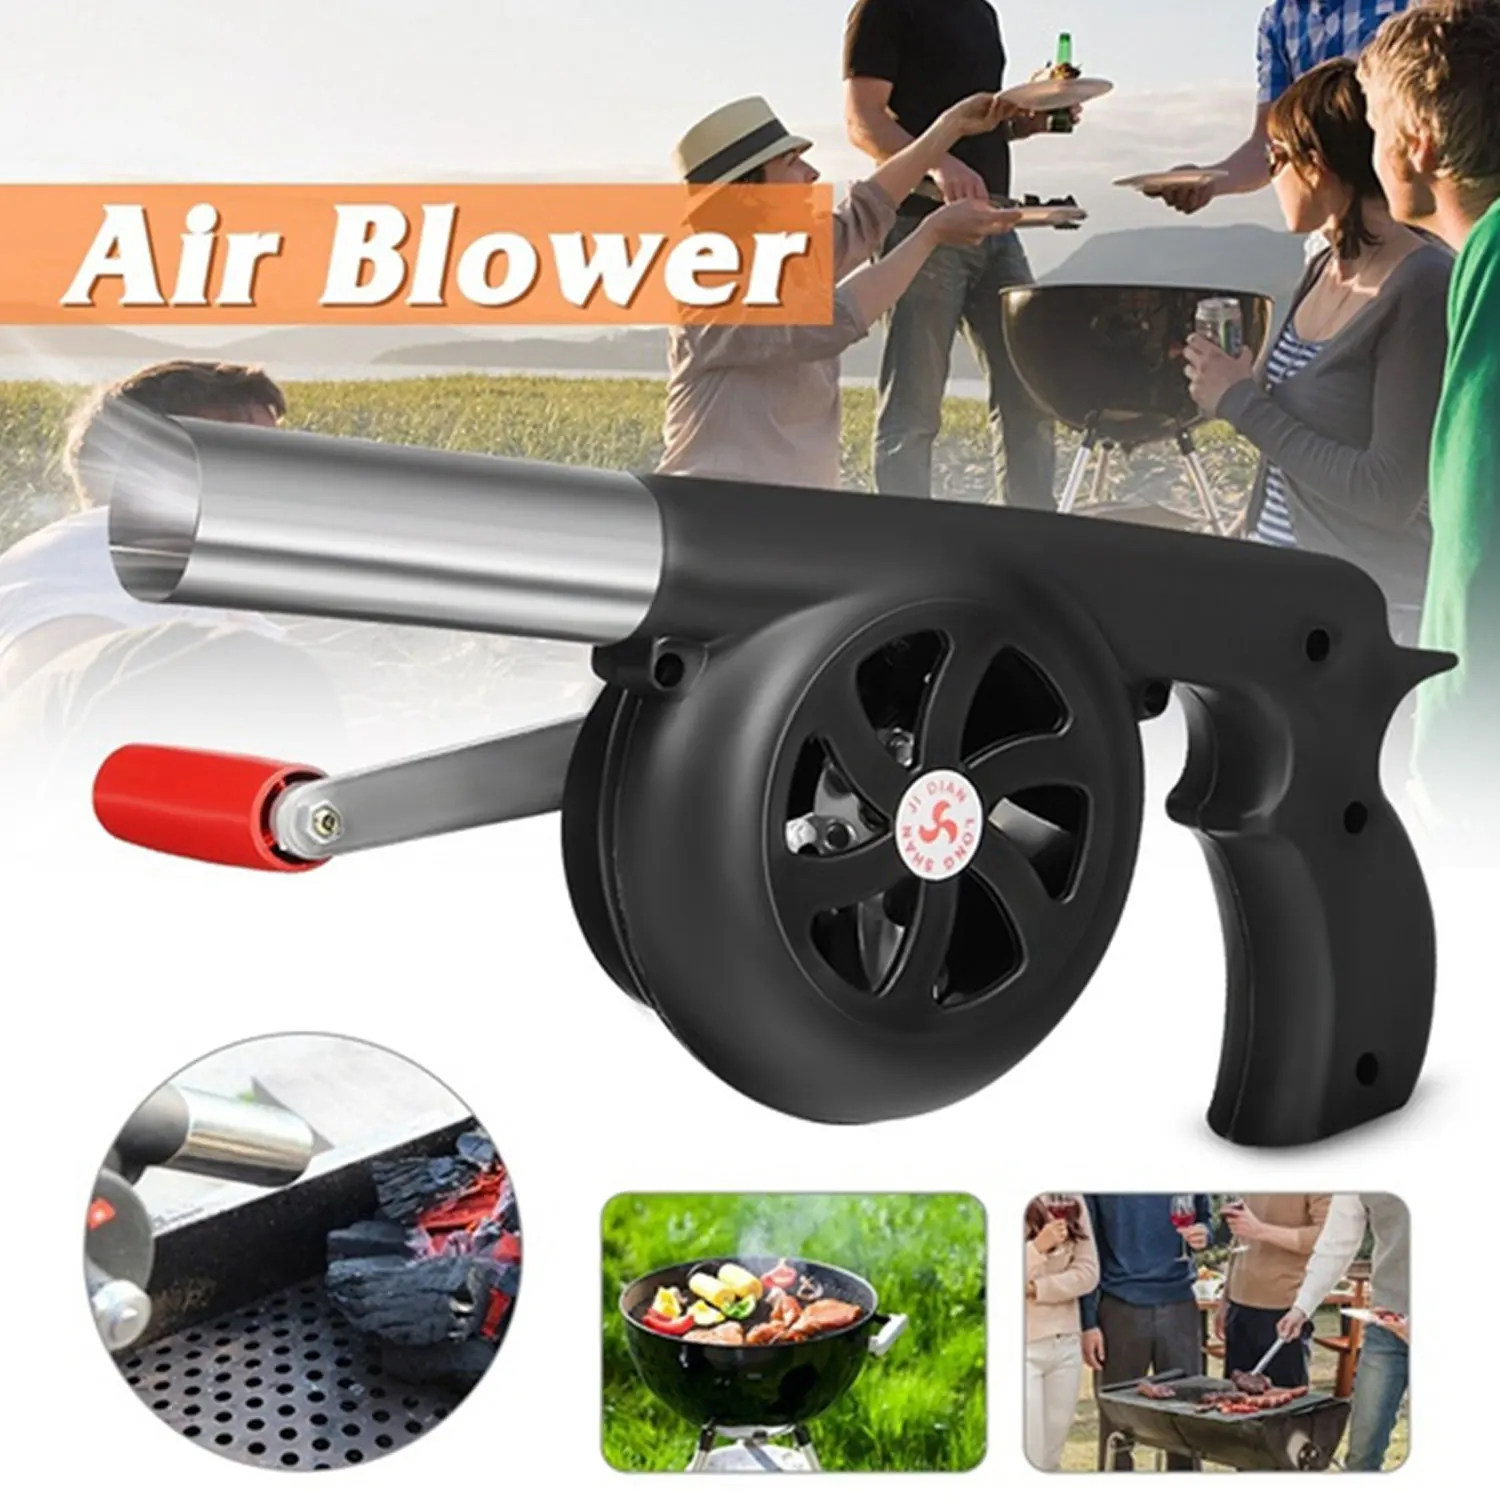 Details about   BBQ Manual Hand Crank Barbecue Charcoal Grill Fire Starter Fan Air Blower tools 